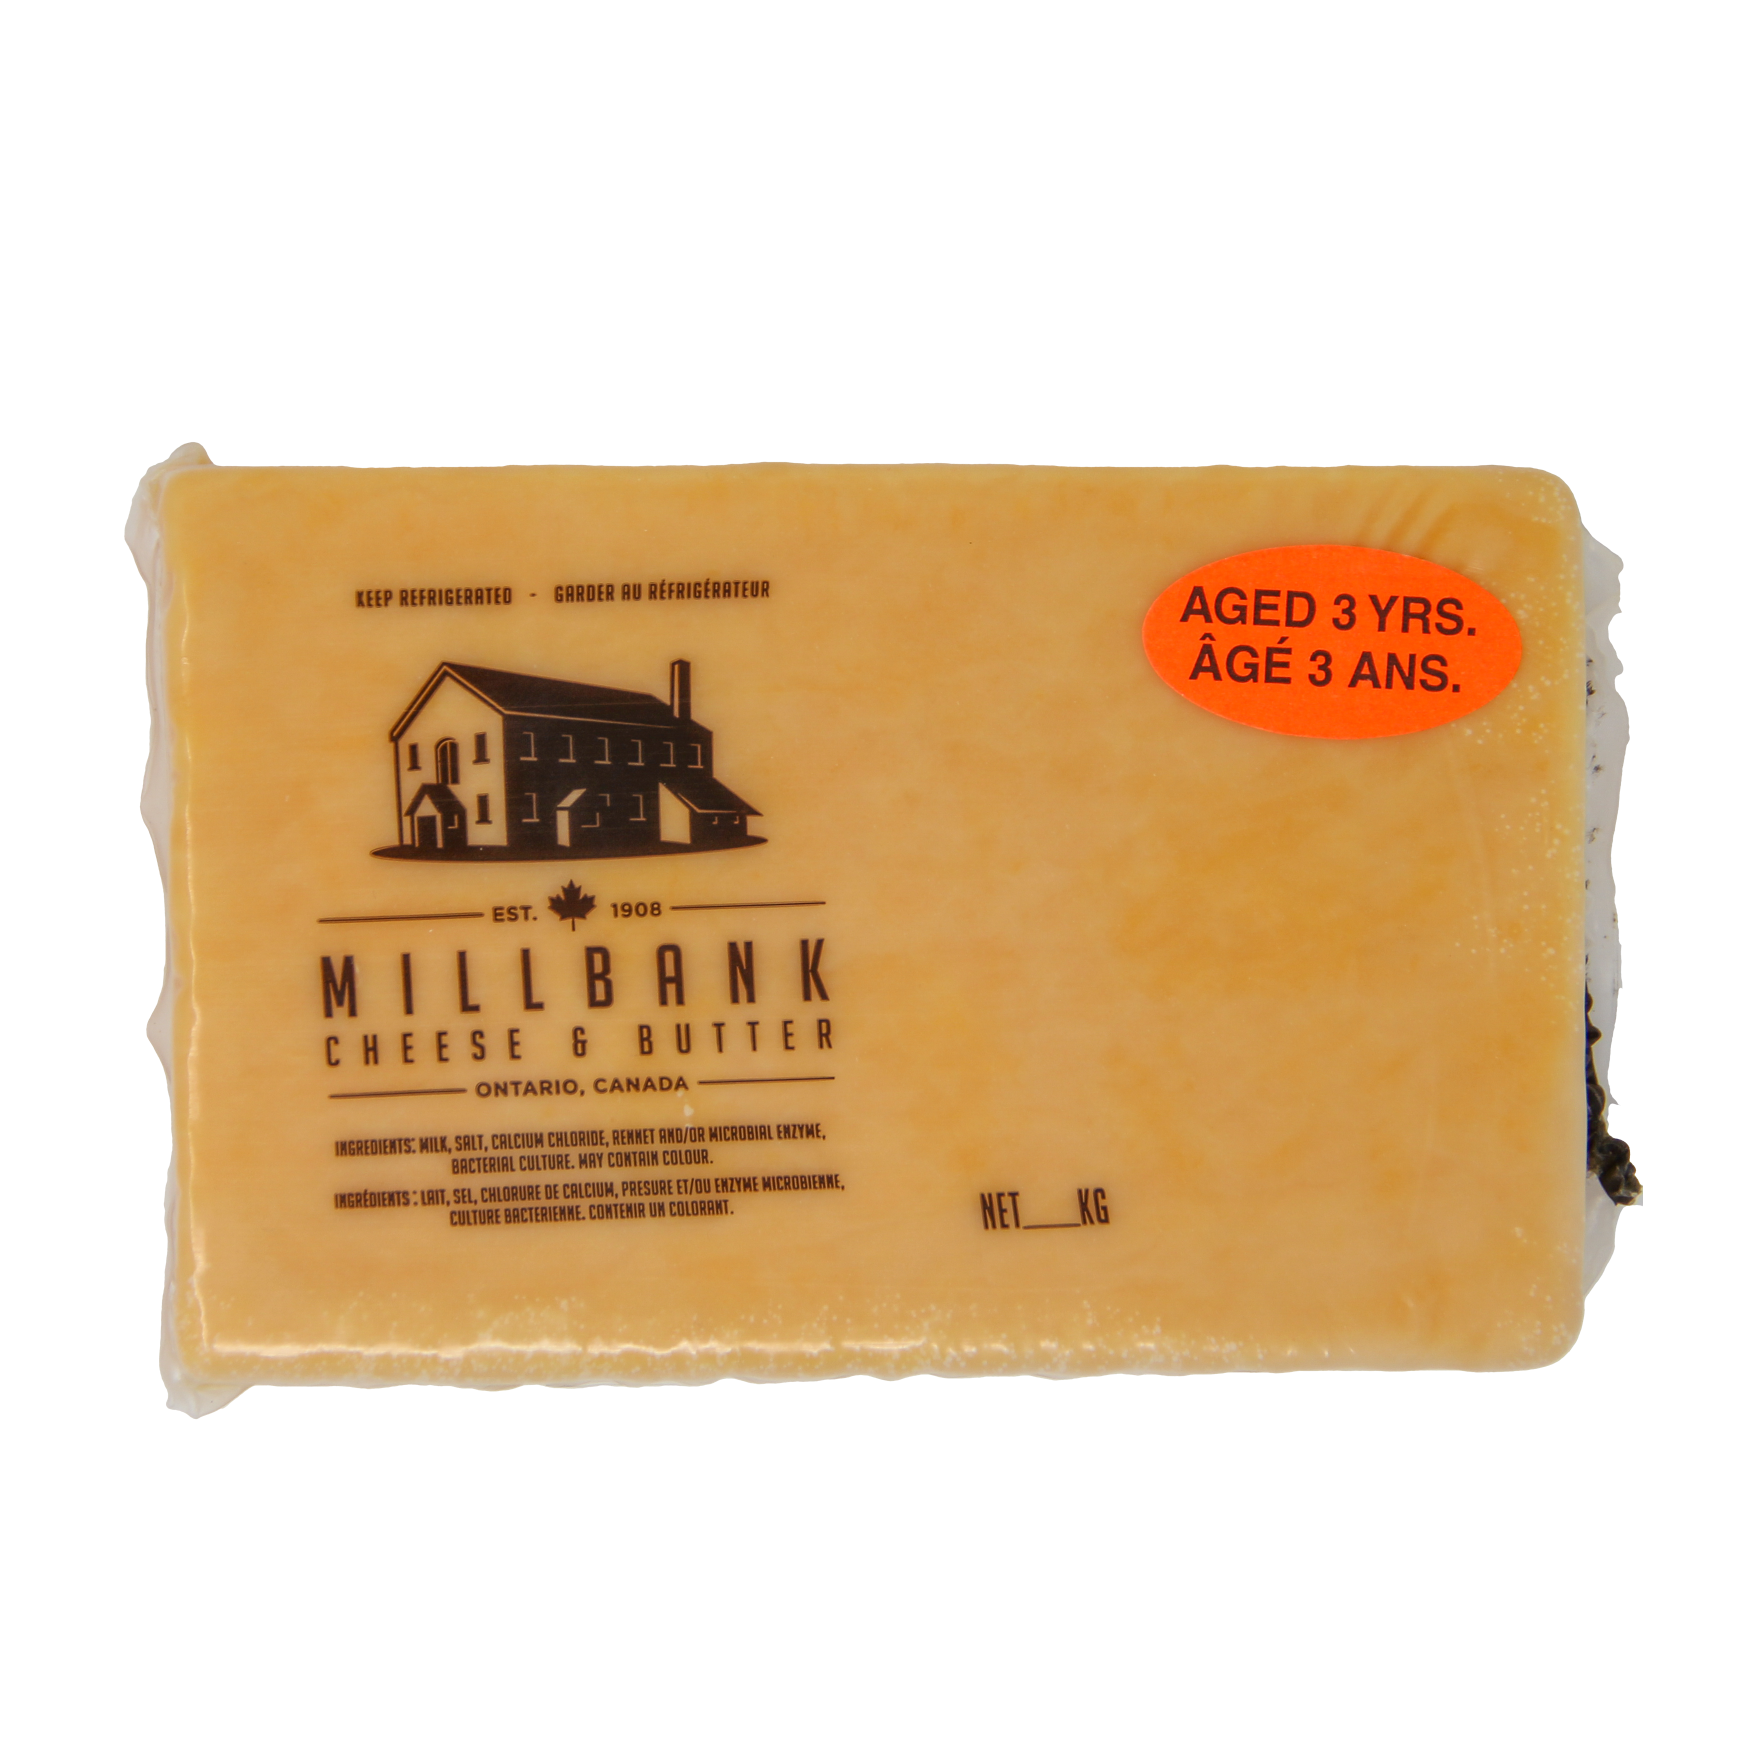 Cheddar Cheeses | Millbank Cheese